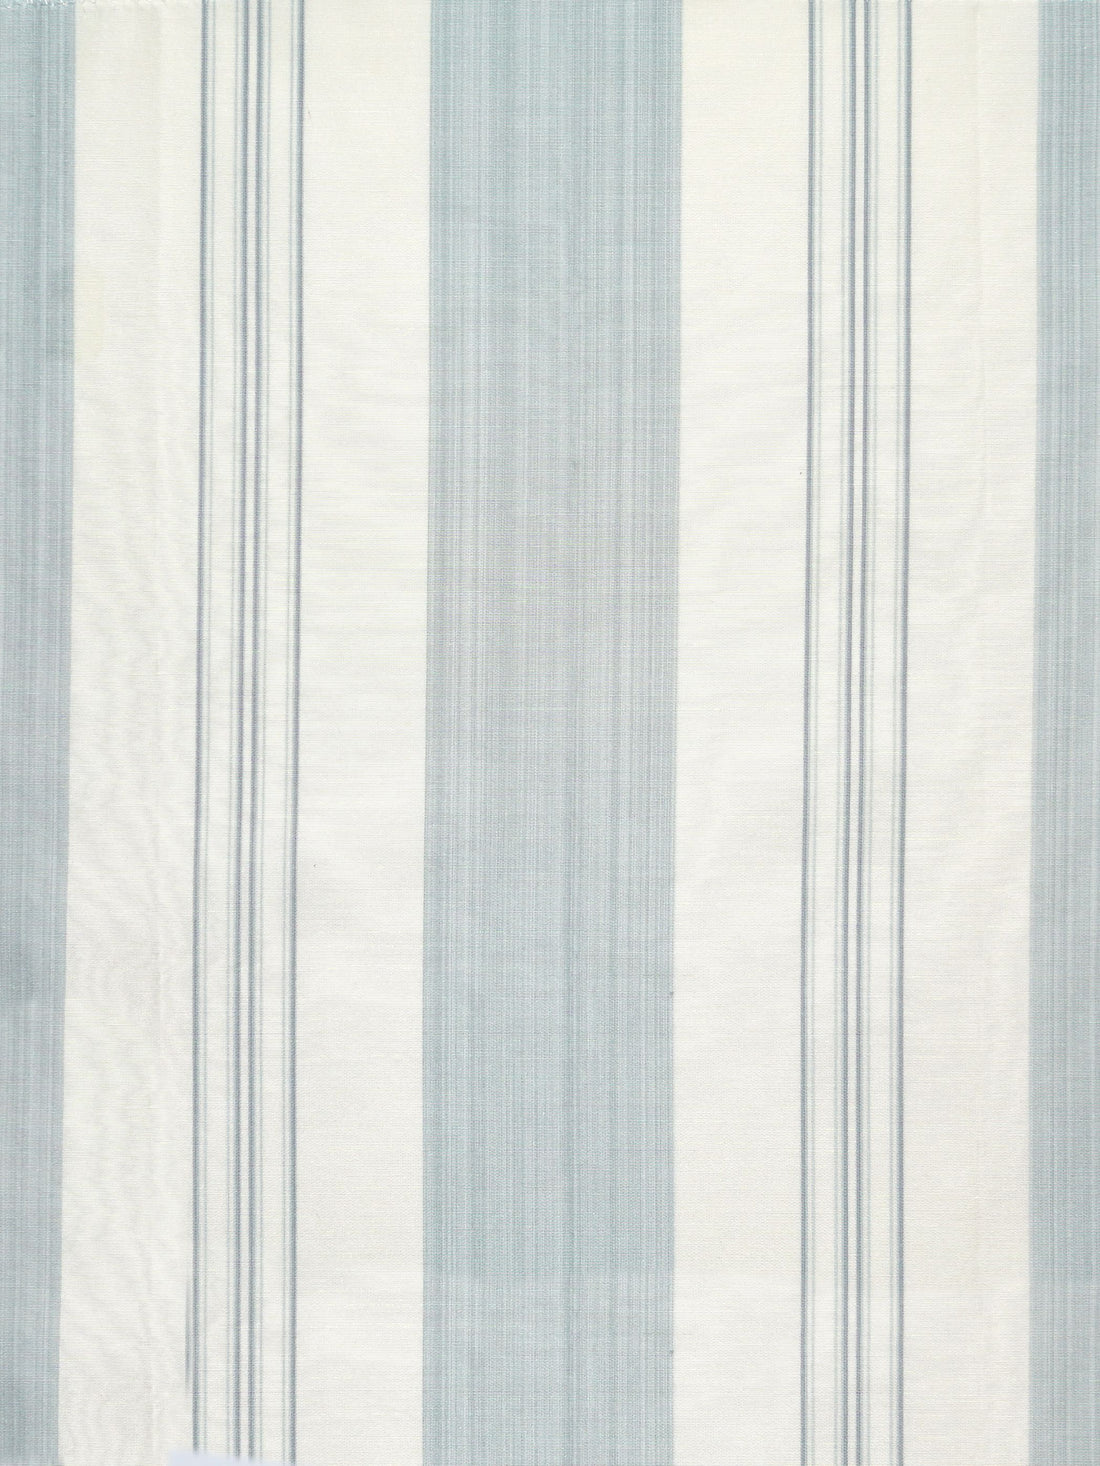 Astor Stripe fabric in sky color - pattern number SC 000126982 - by Scalamandre in the Scalamandre Fabrics Book 1 collection